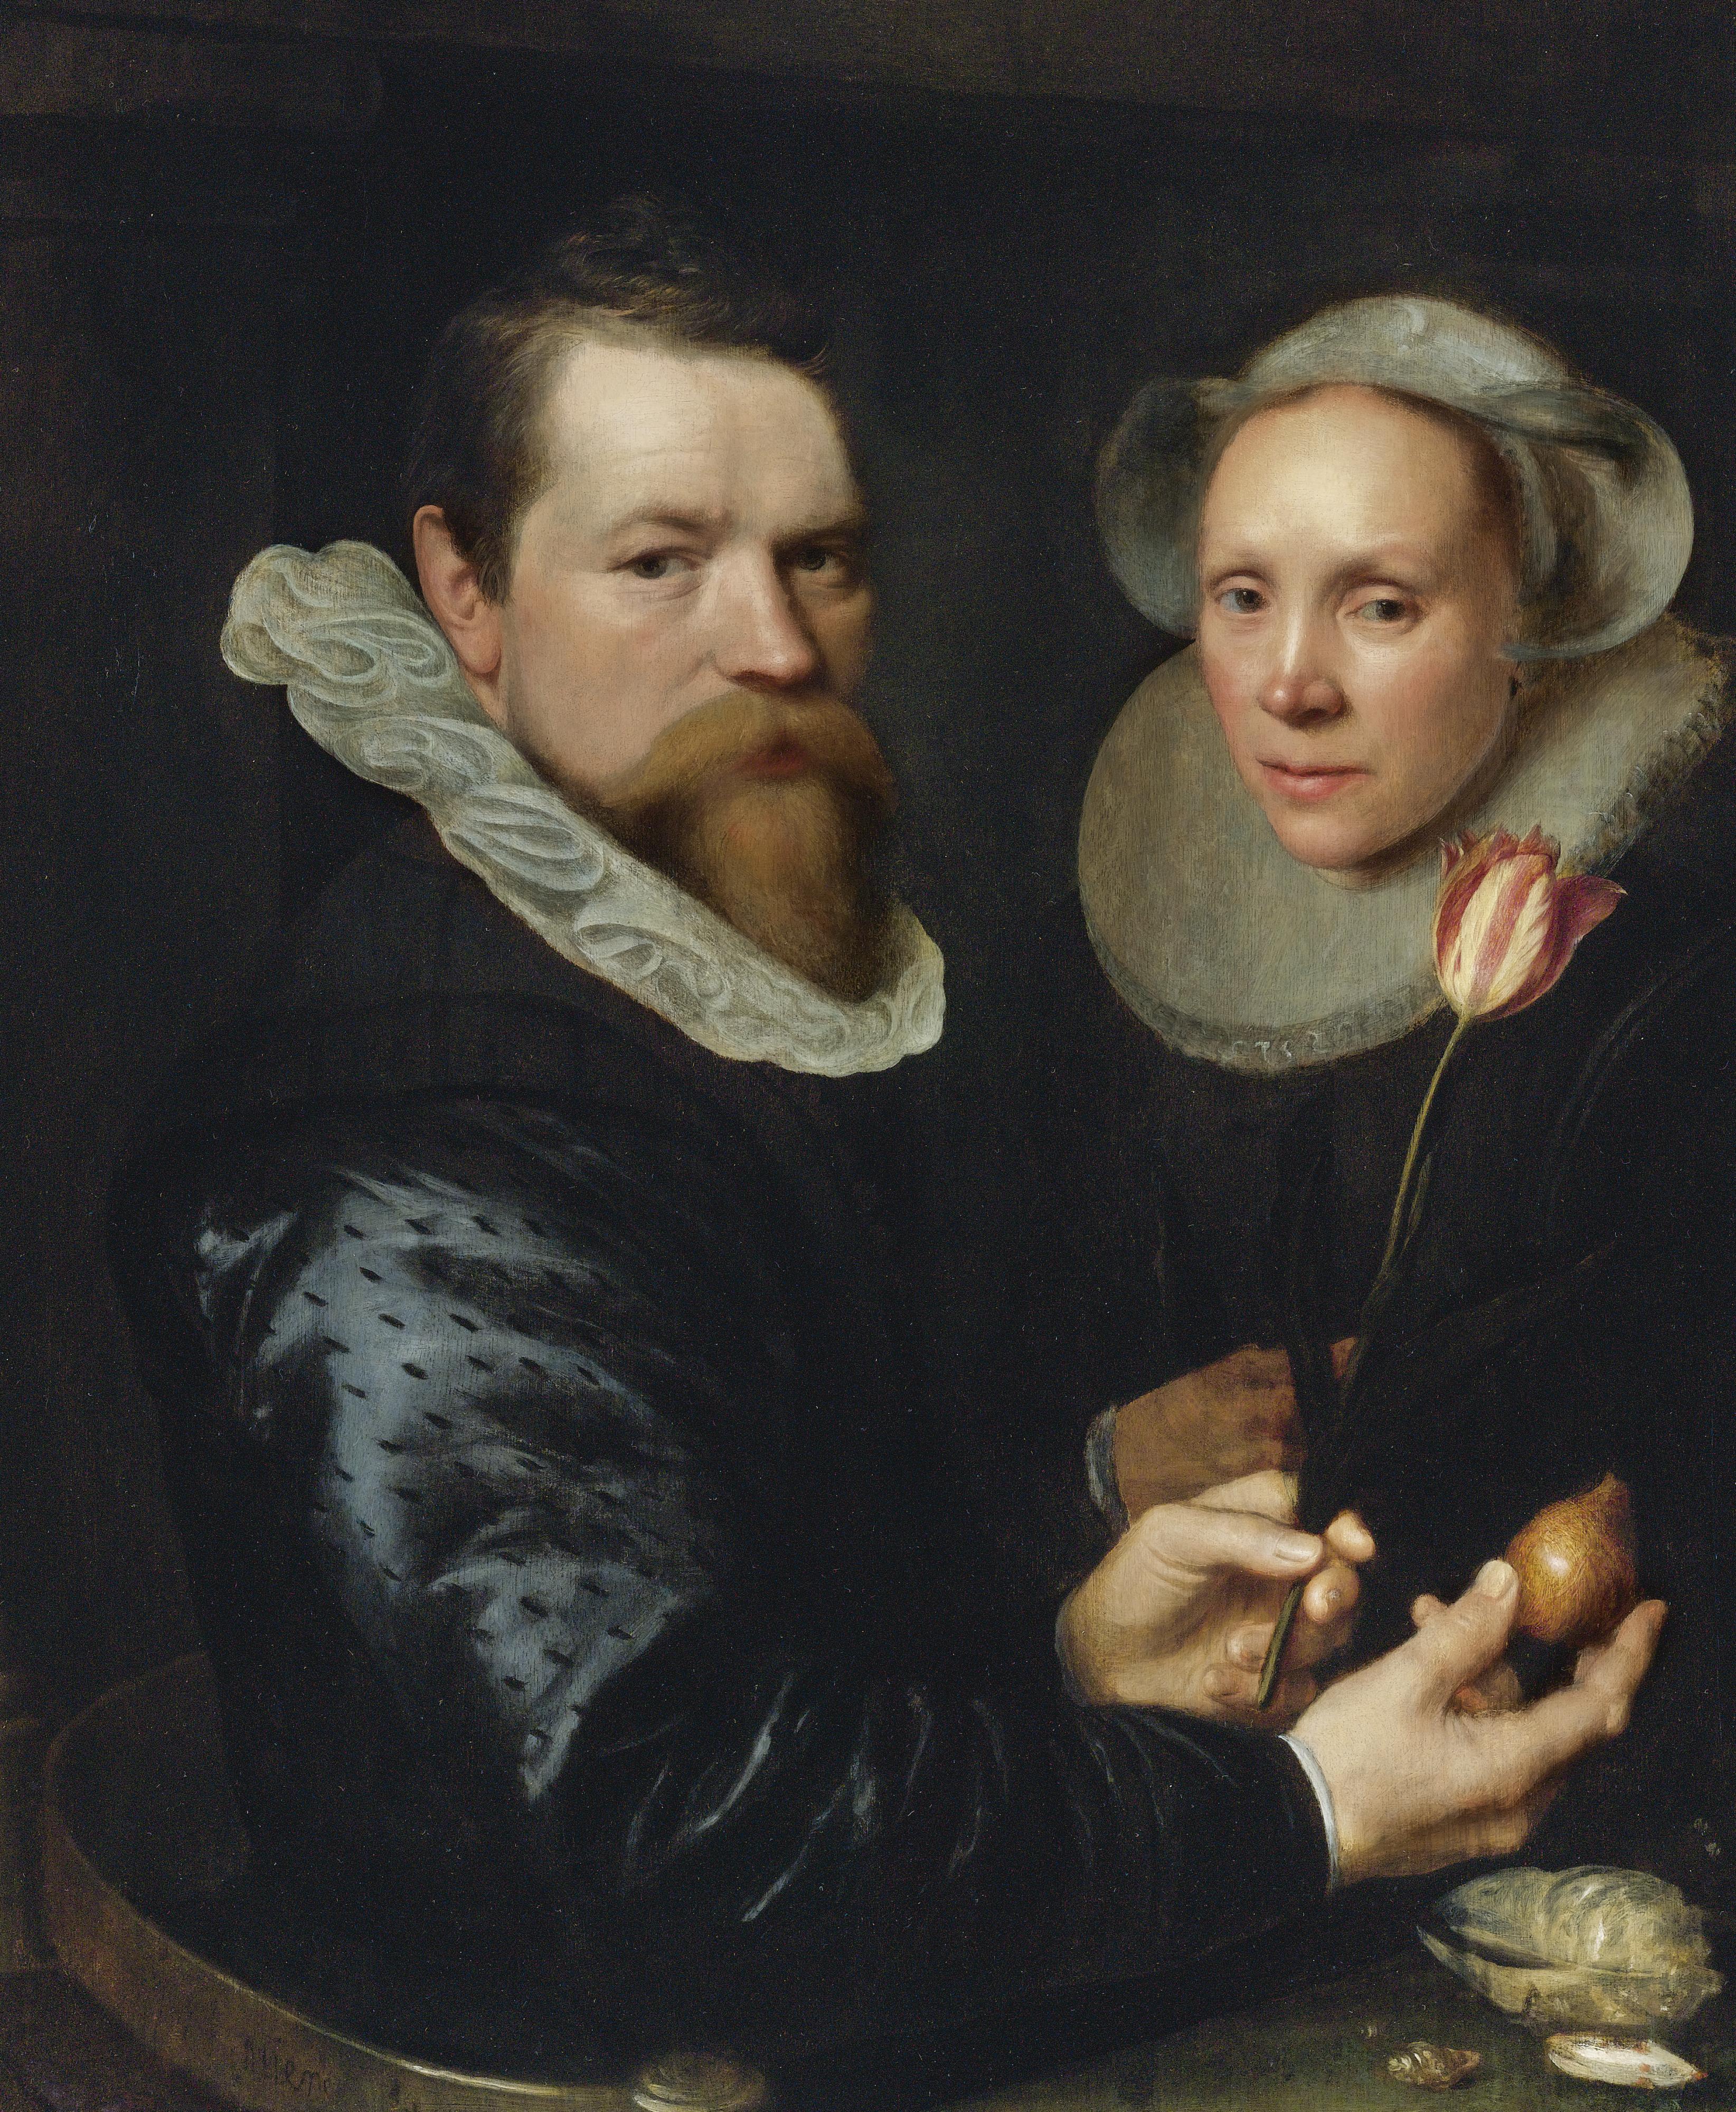 Double Portrait of a Husband and Wife with Tulip, Bulb, and Shells oil on panel painting by Michiel Jansz van Mierevelt, 1609  Sotheby's